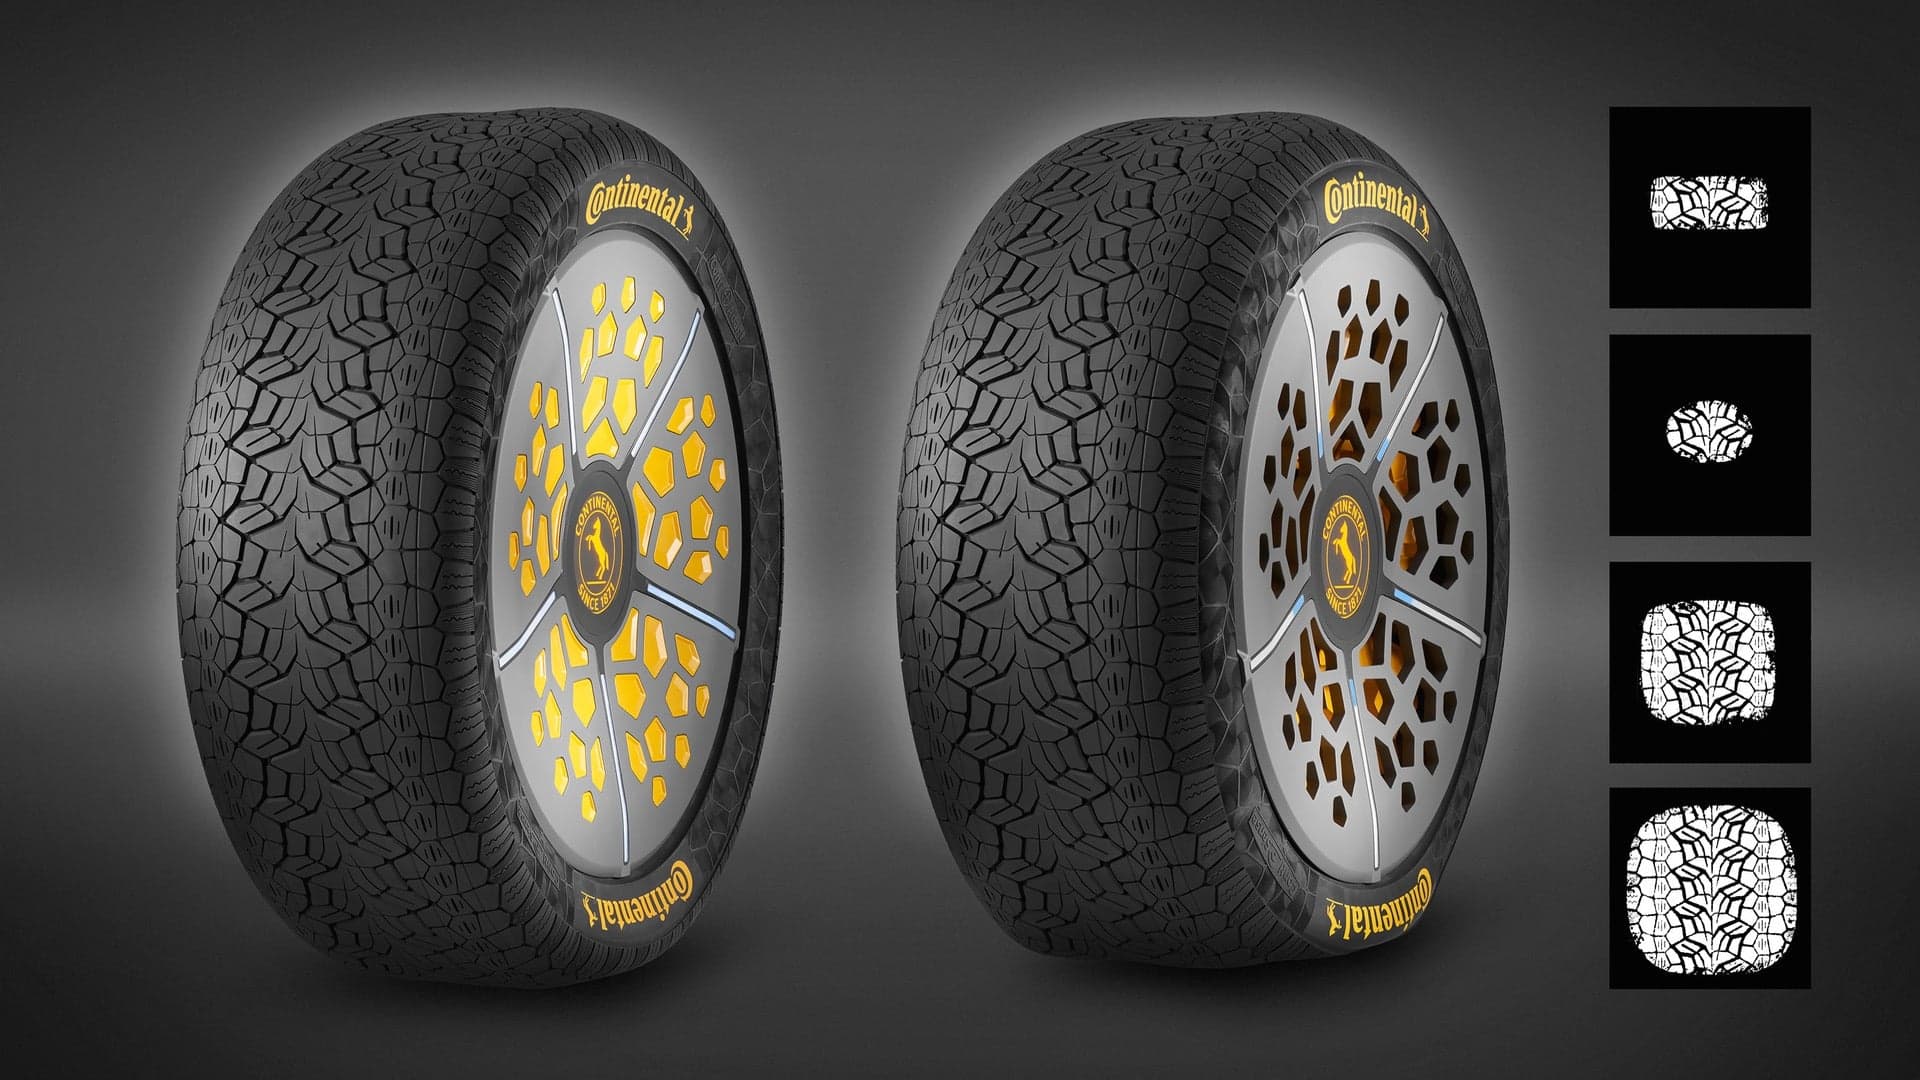 Continental’s Tire Concept Can Adjust Pressure Automatically, Warn Drivers of Damage